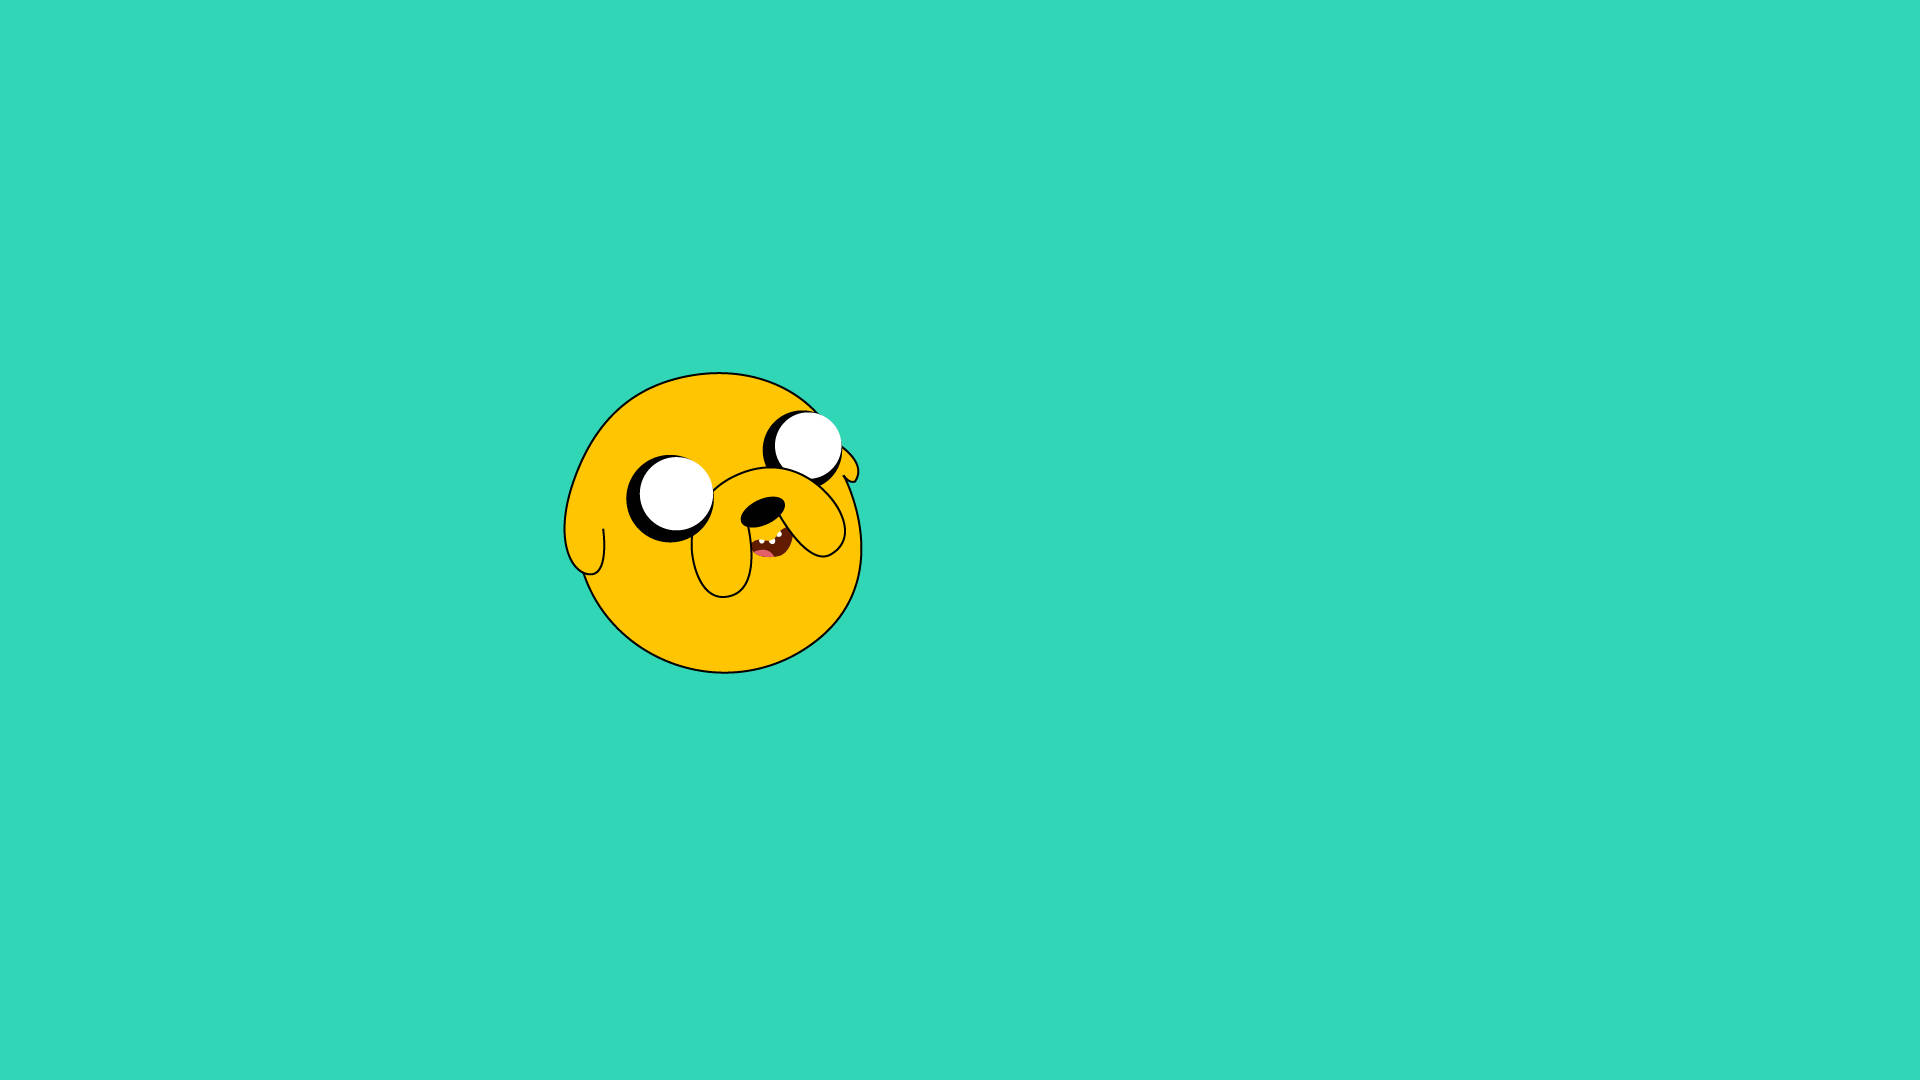 Inventing New Adventures: Jake the Dog Wallpaper